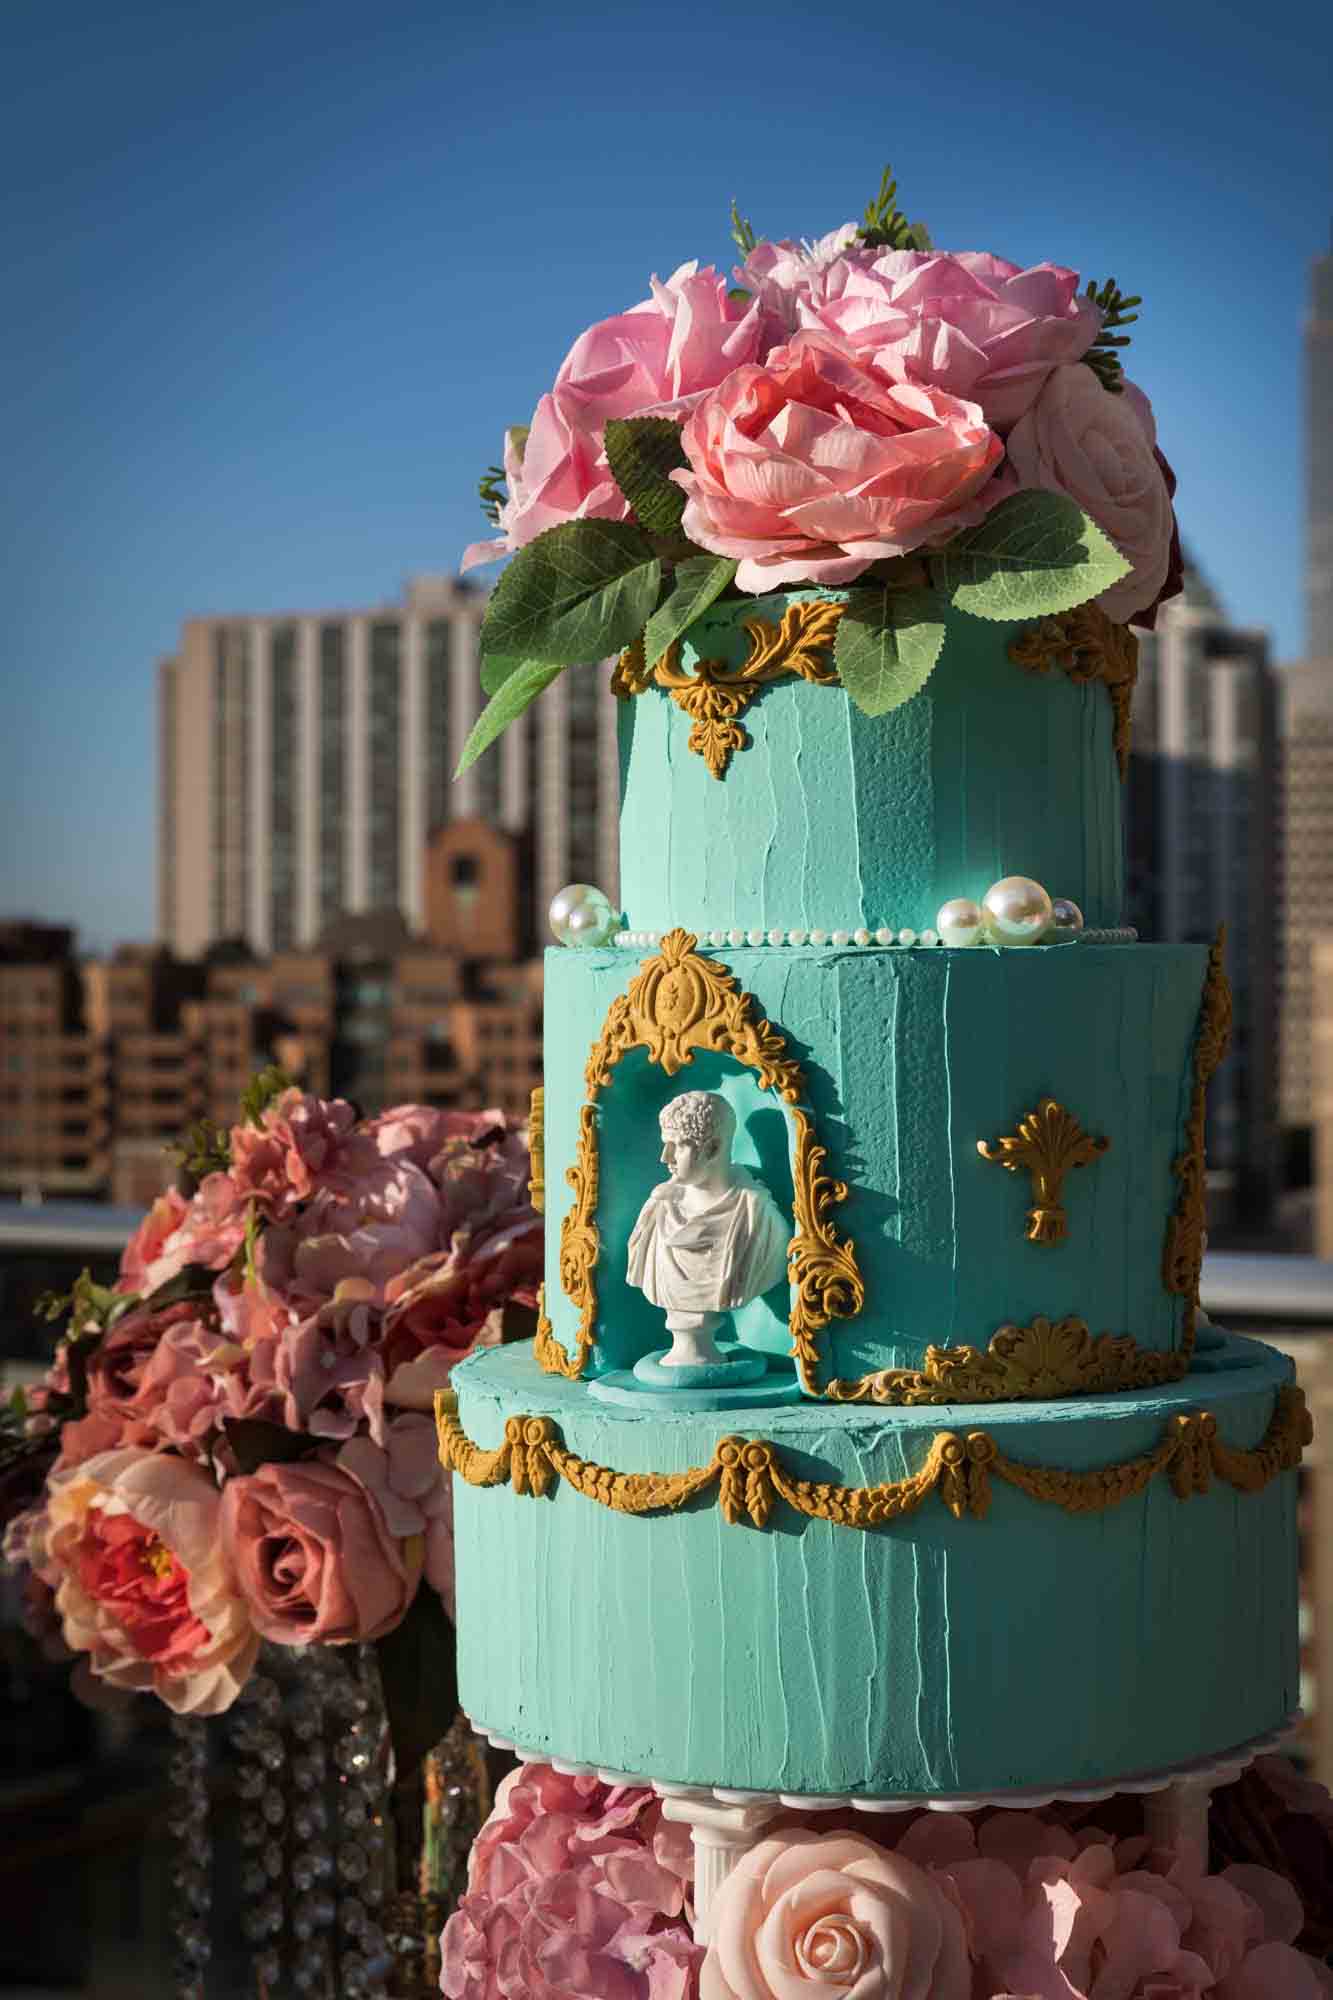 A three-tiered cake with aqua frosting and pink flowers on top